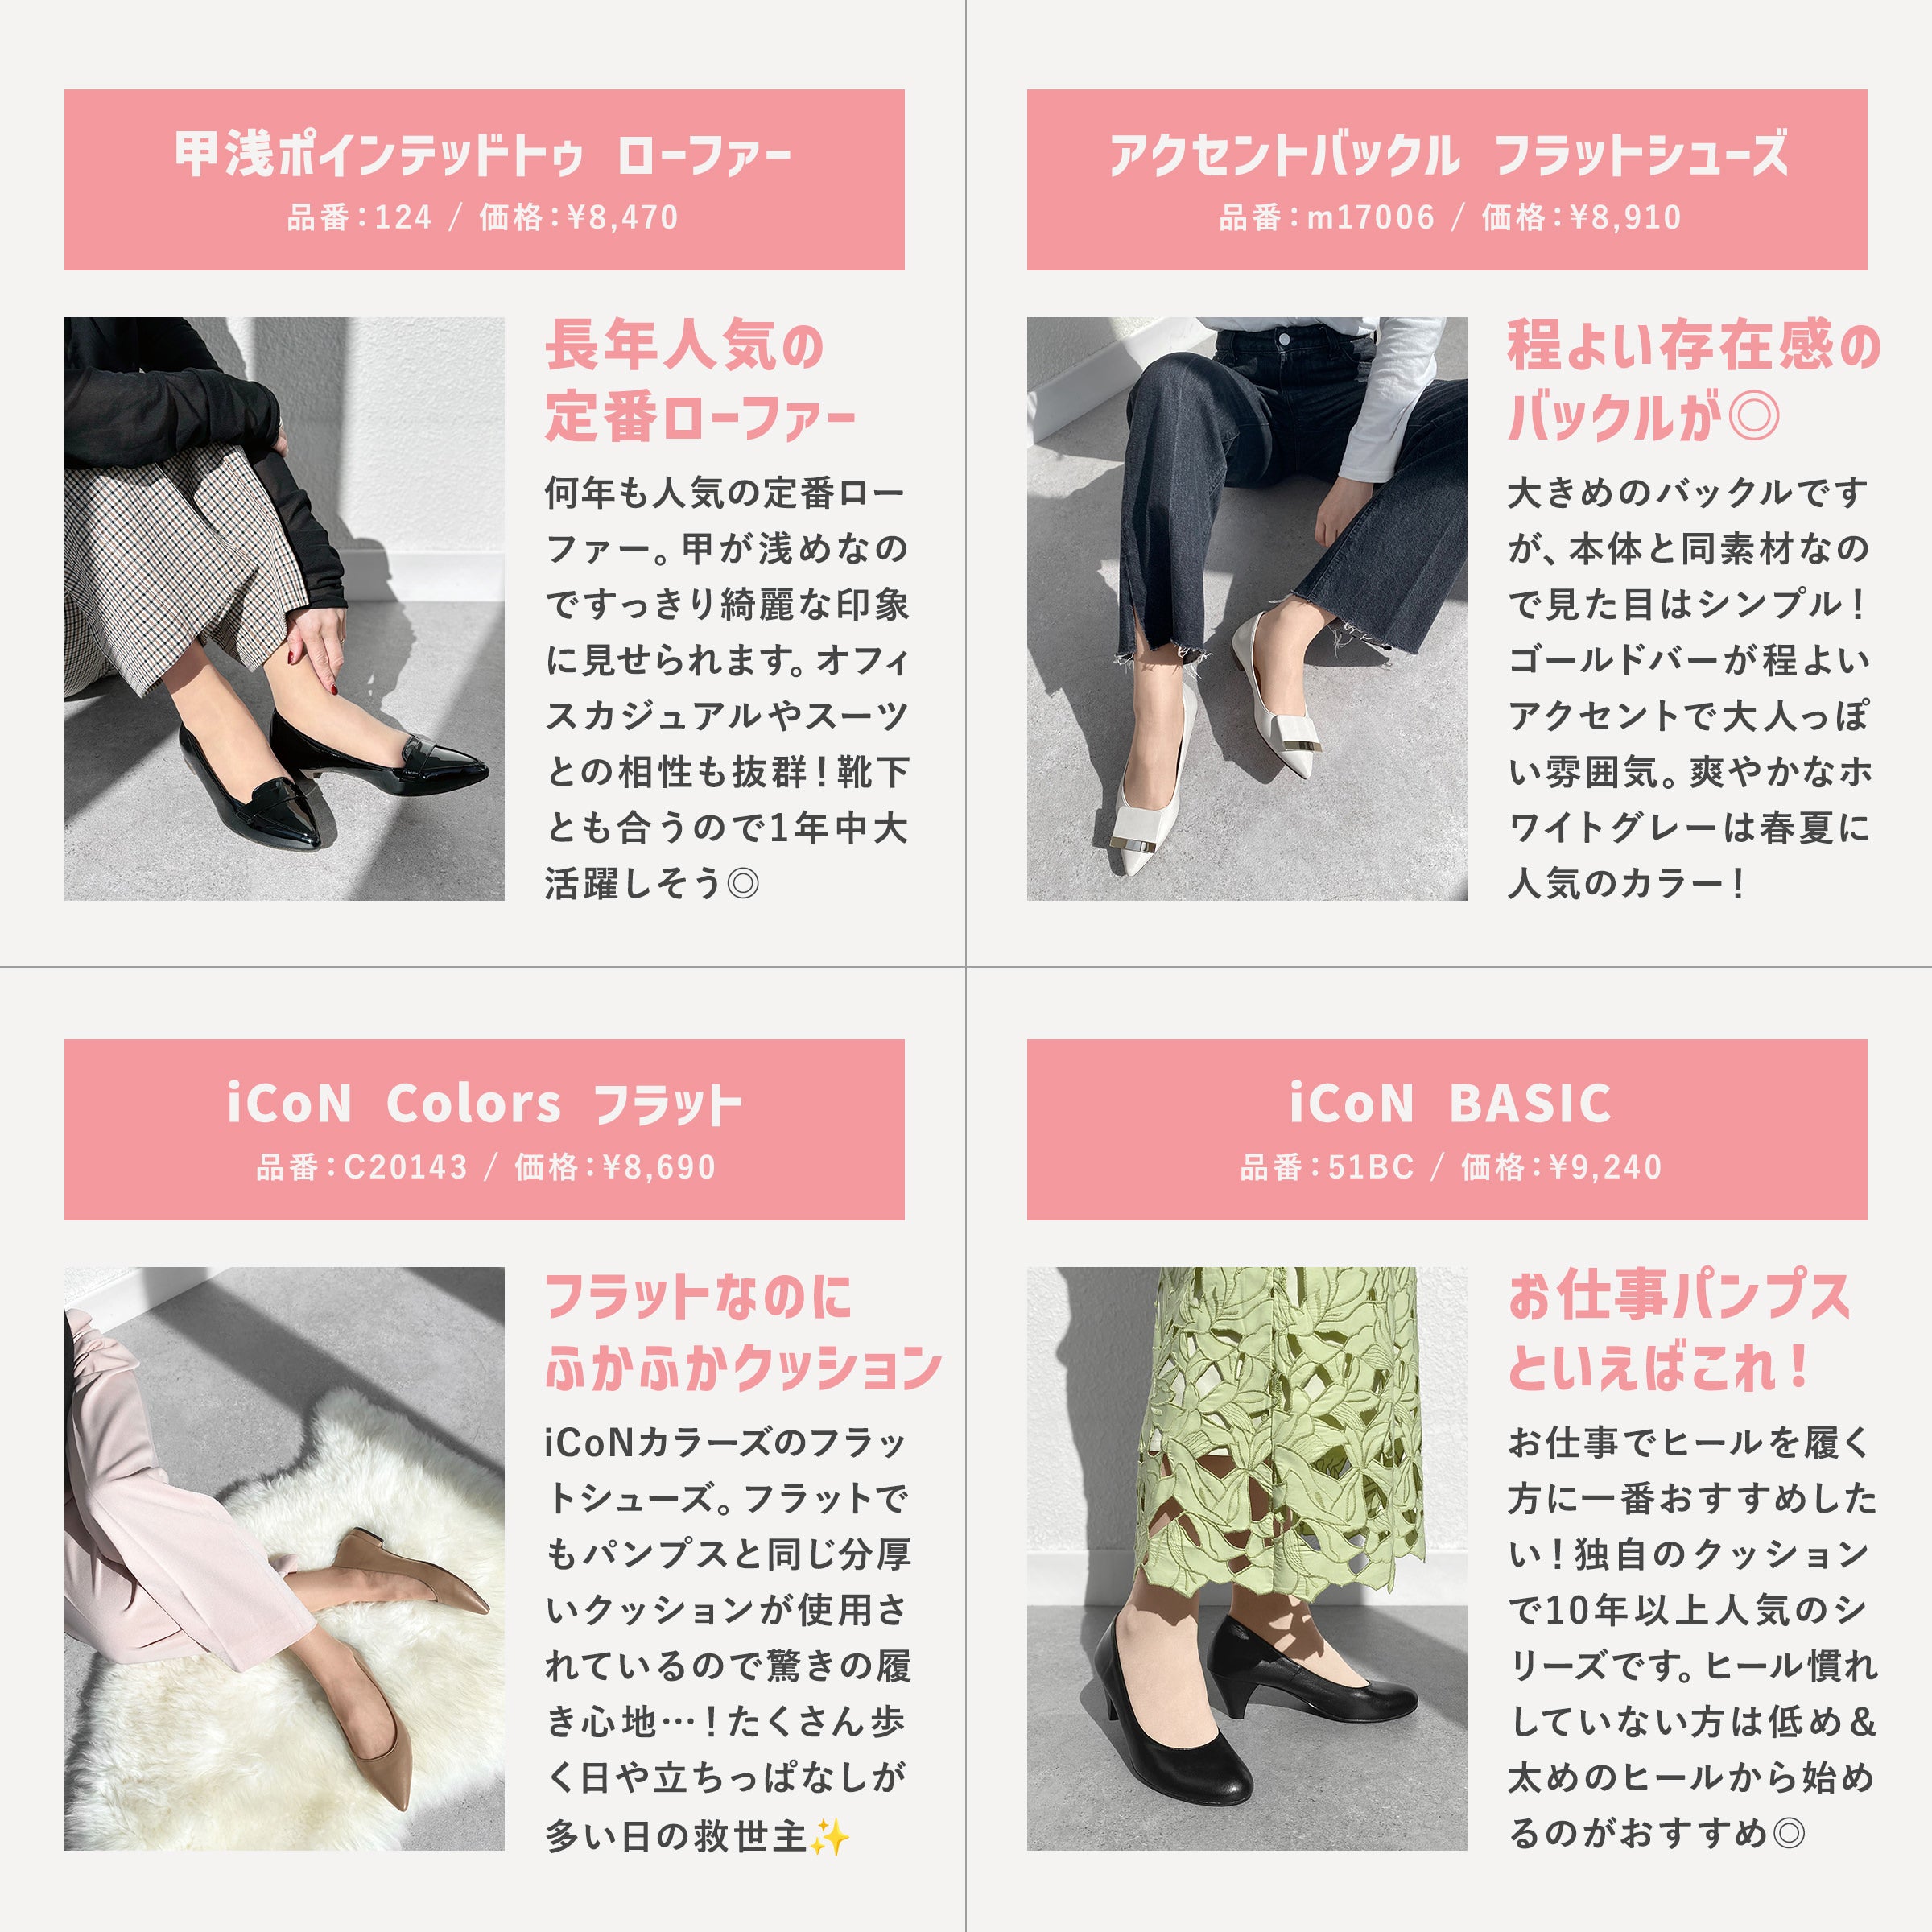 A must-see for new members of society! Flats and low heels that can be worn at the office